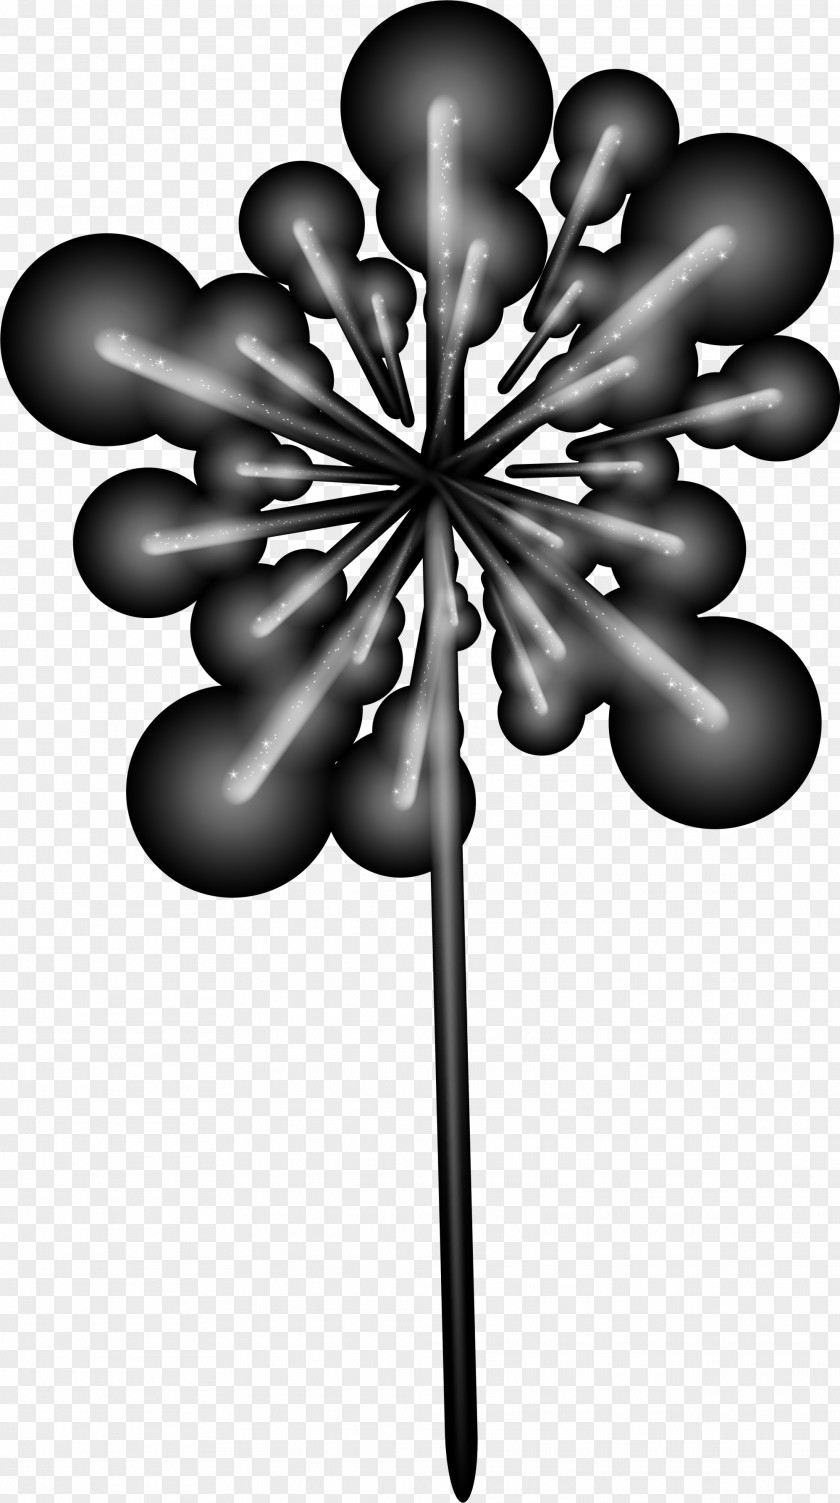 Black Dream Fireworks And White Graphic Design PNG